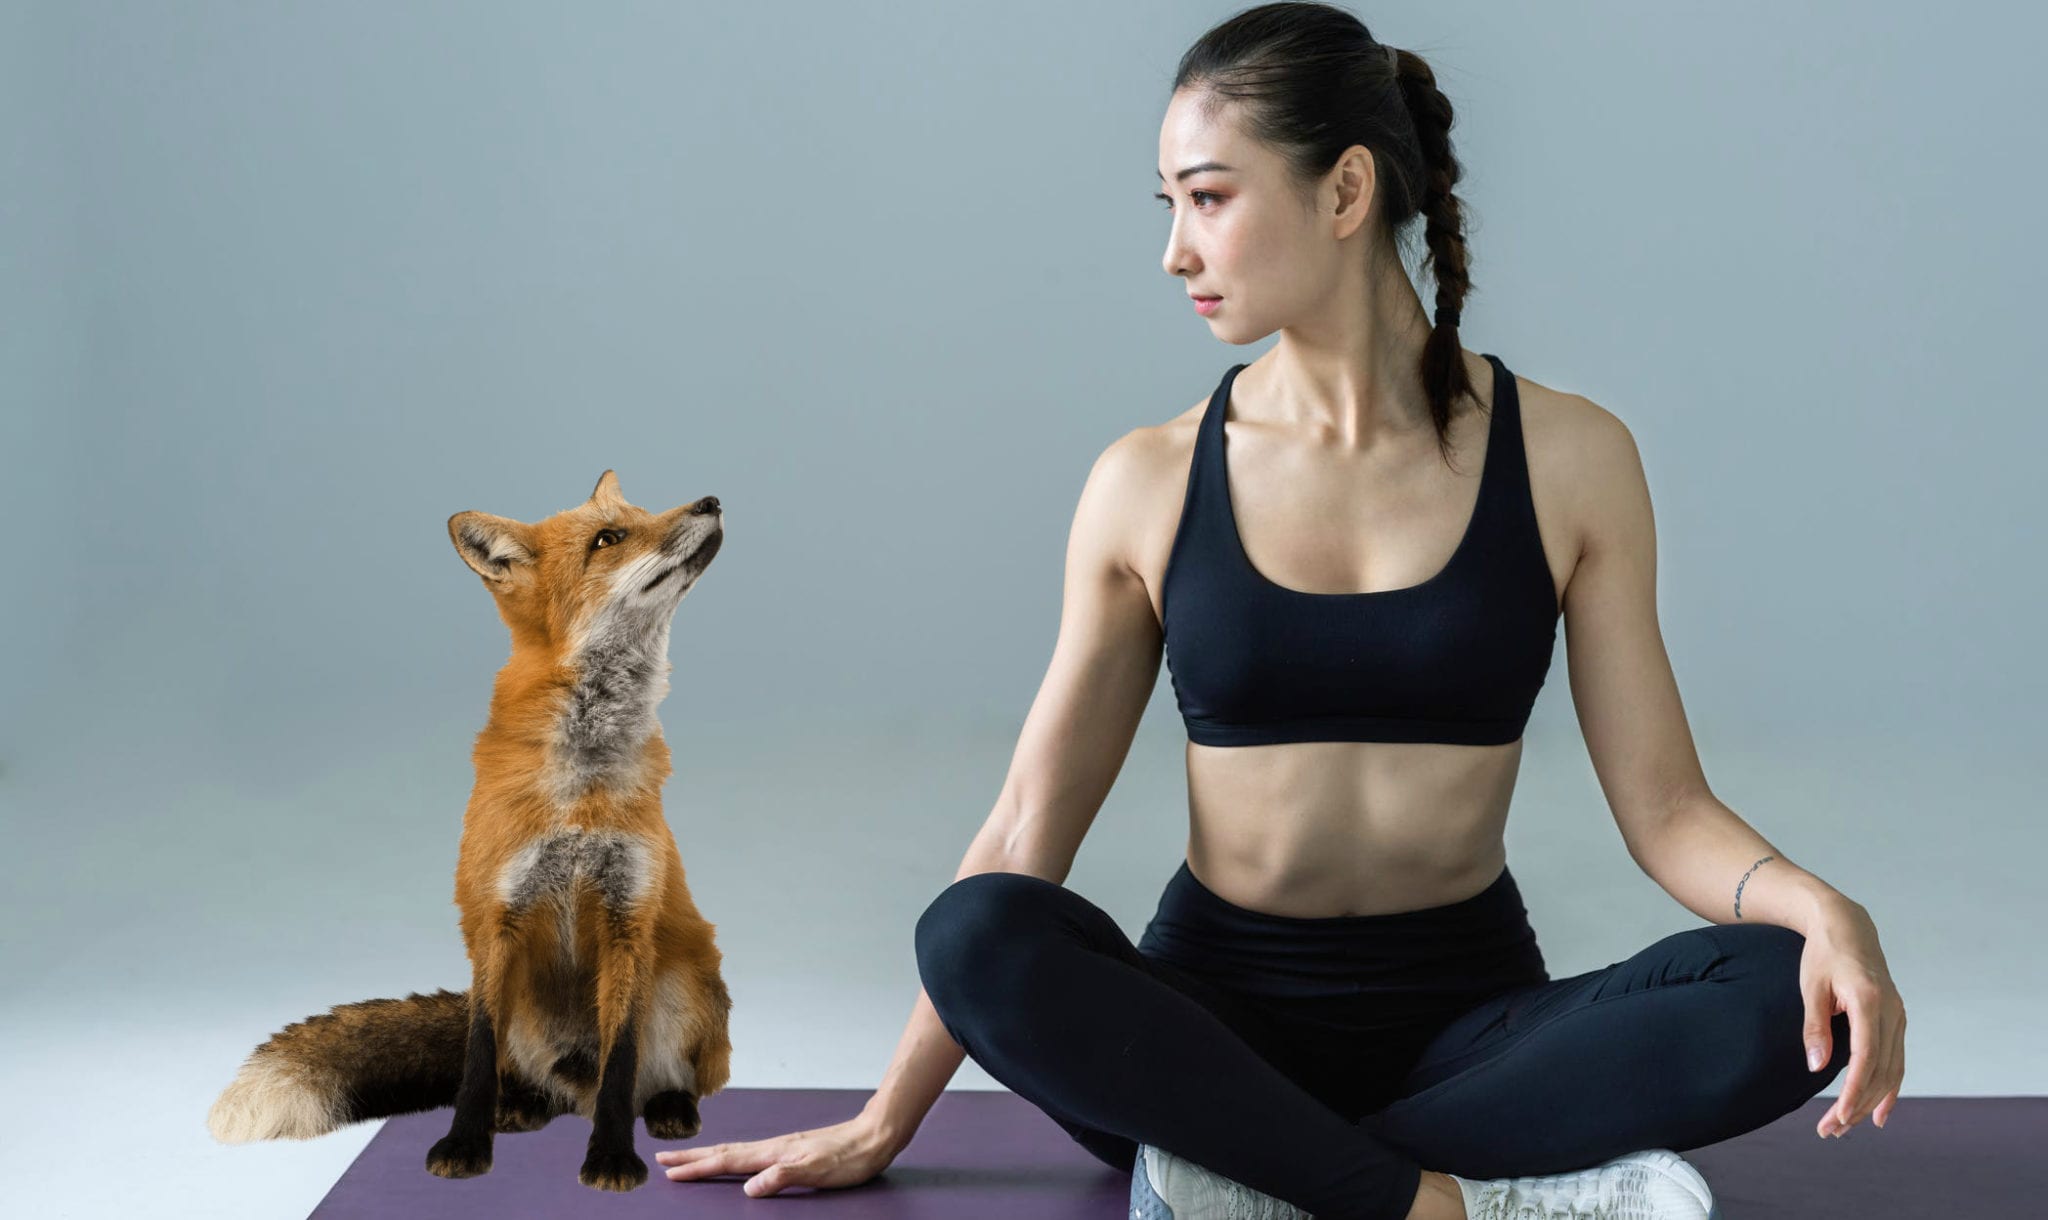 A woman sitting on a yoga mat next to a dog